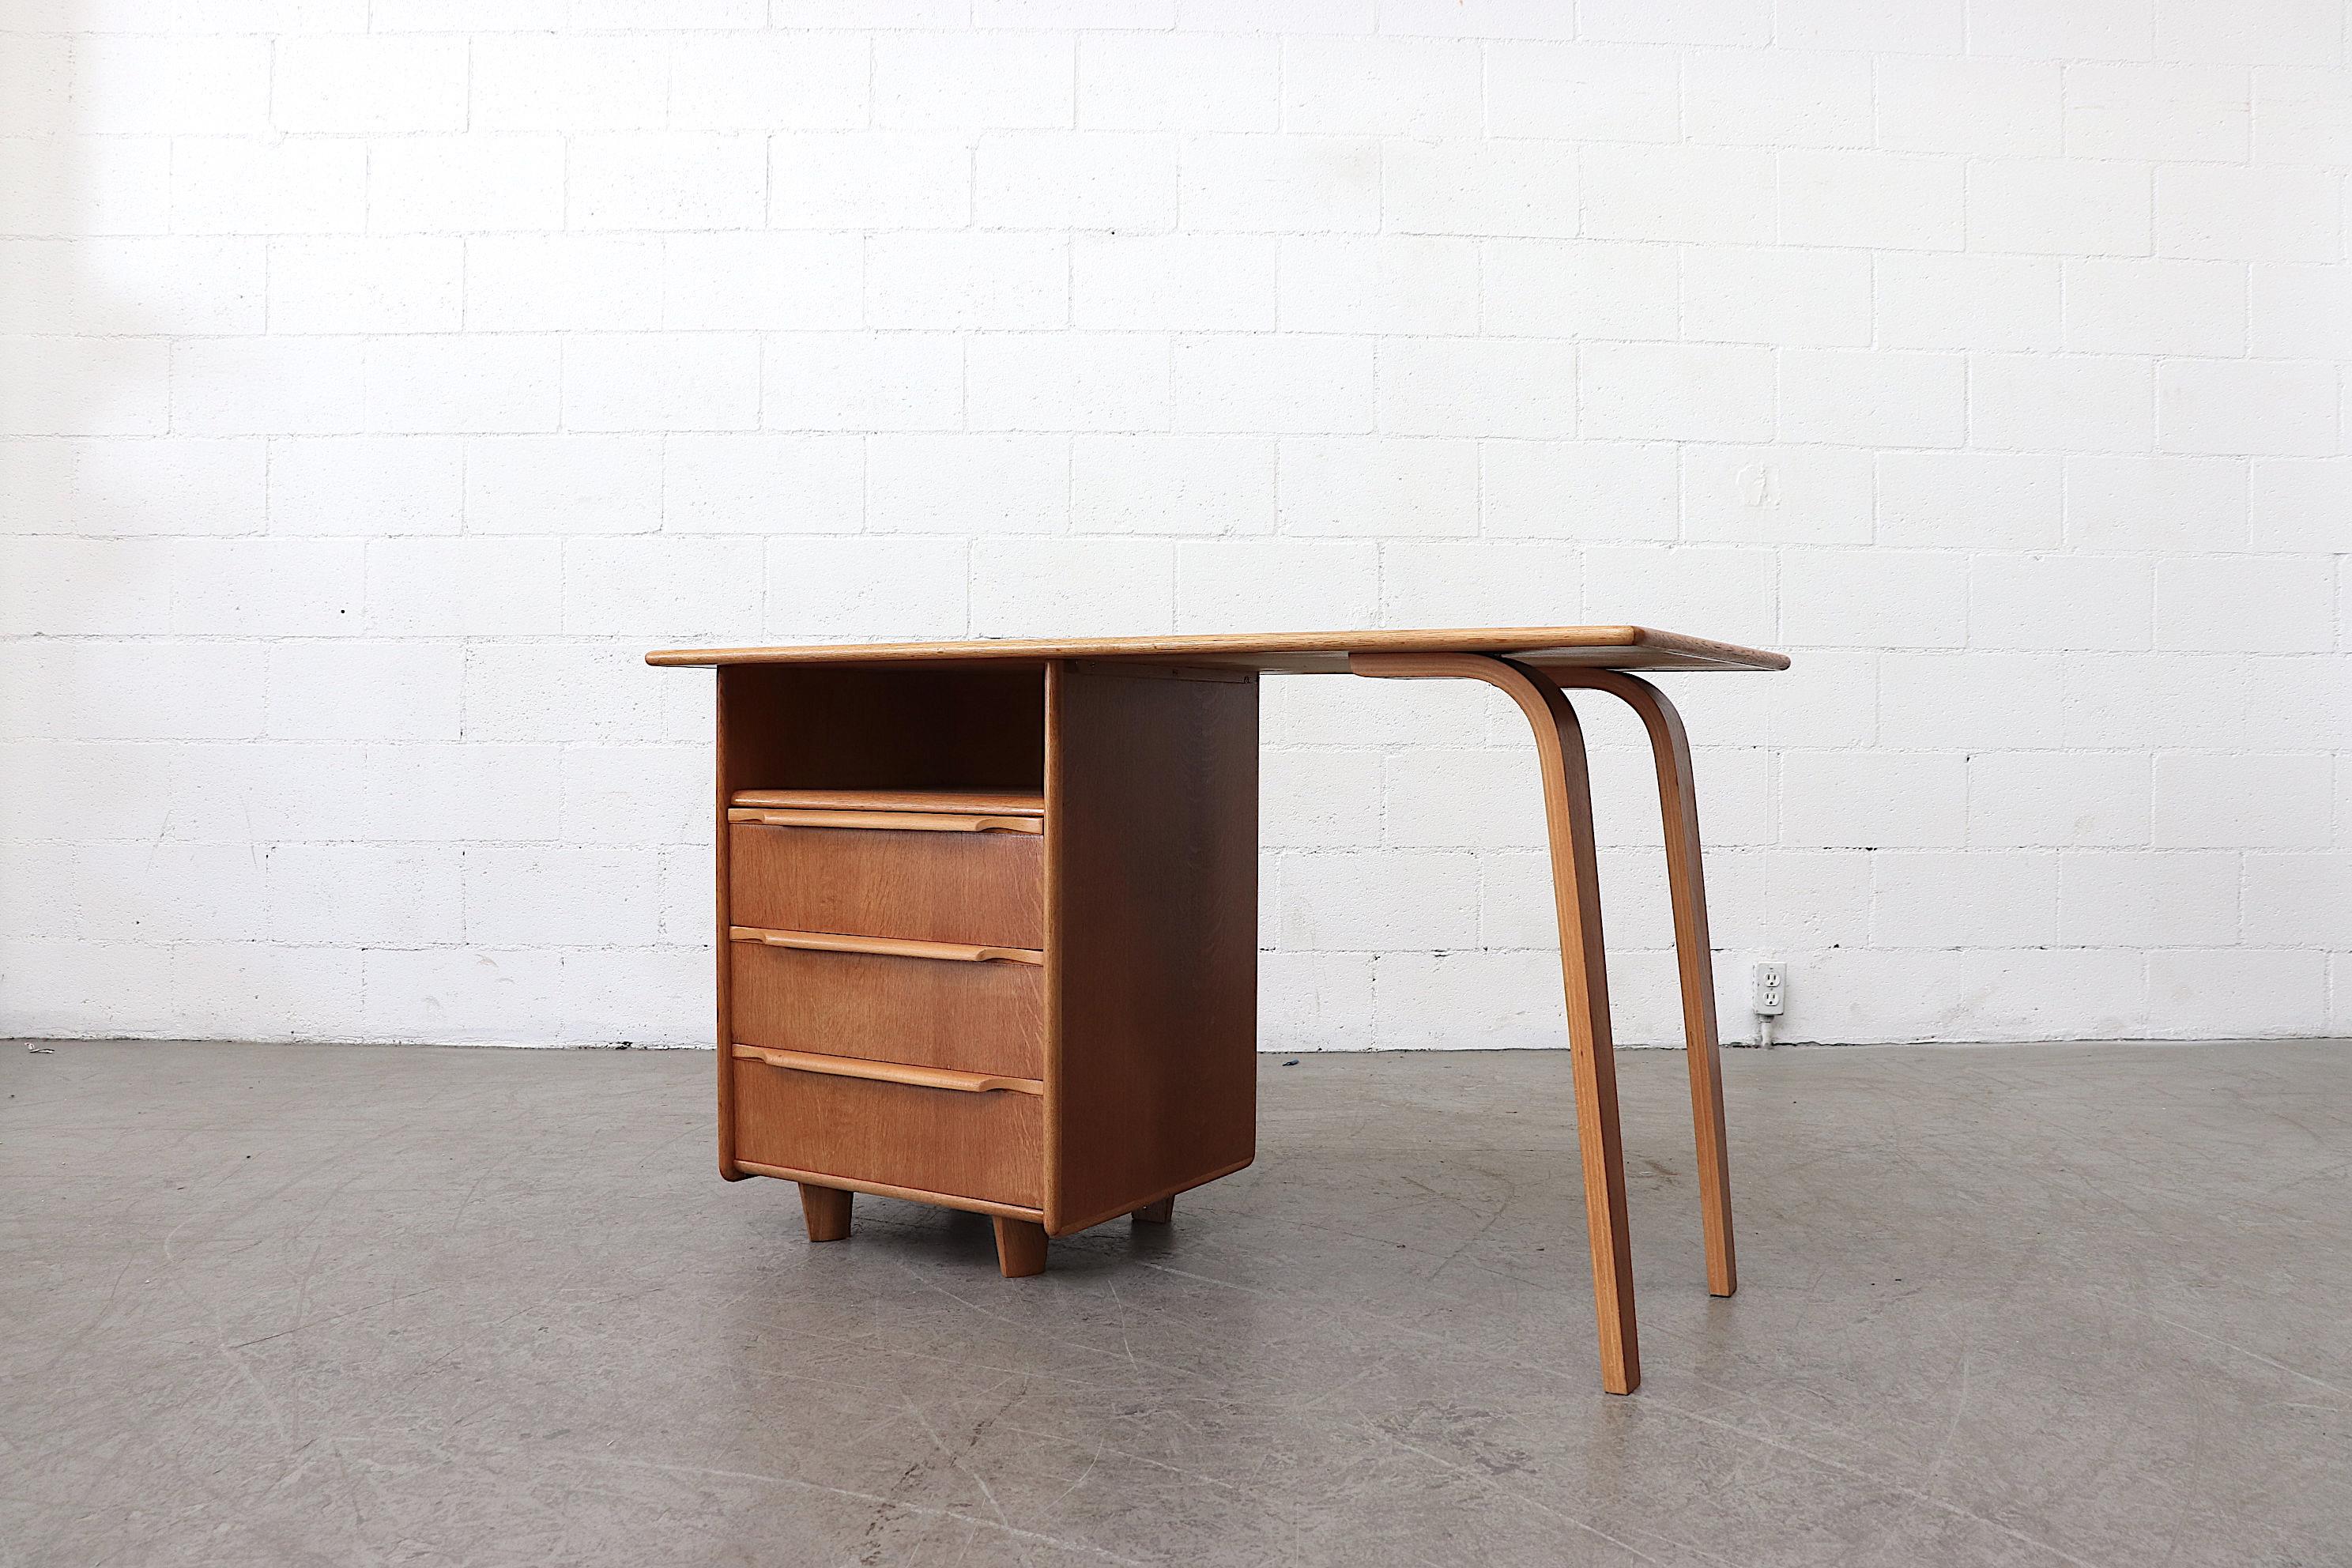 Sweet little desk designed in 1948 by Cees Braakman from the oak series for Pastoe, handsome bent legs. 3 left-side sliding drawers with organically carved hand pulls. Desk in original condition.